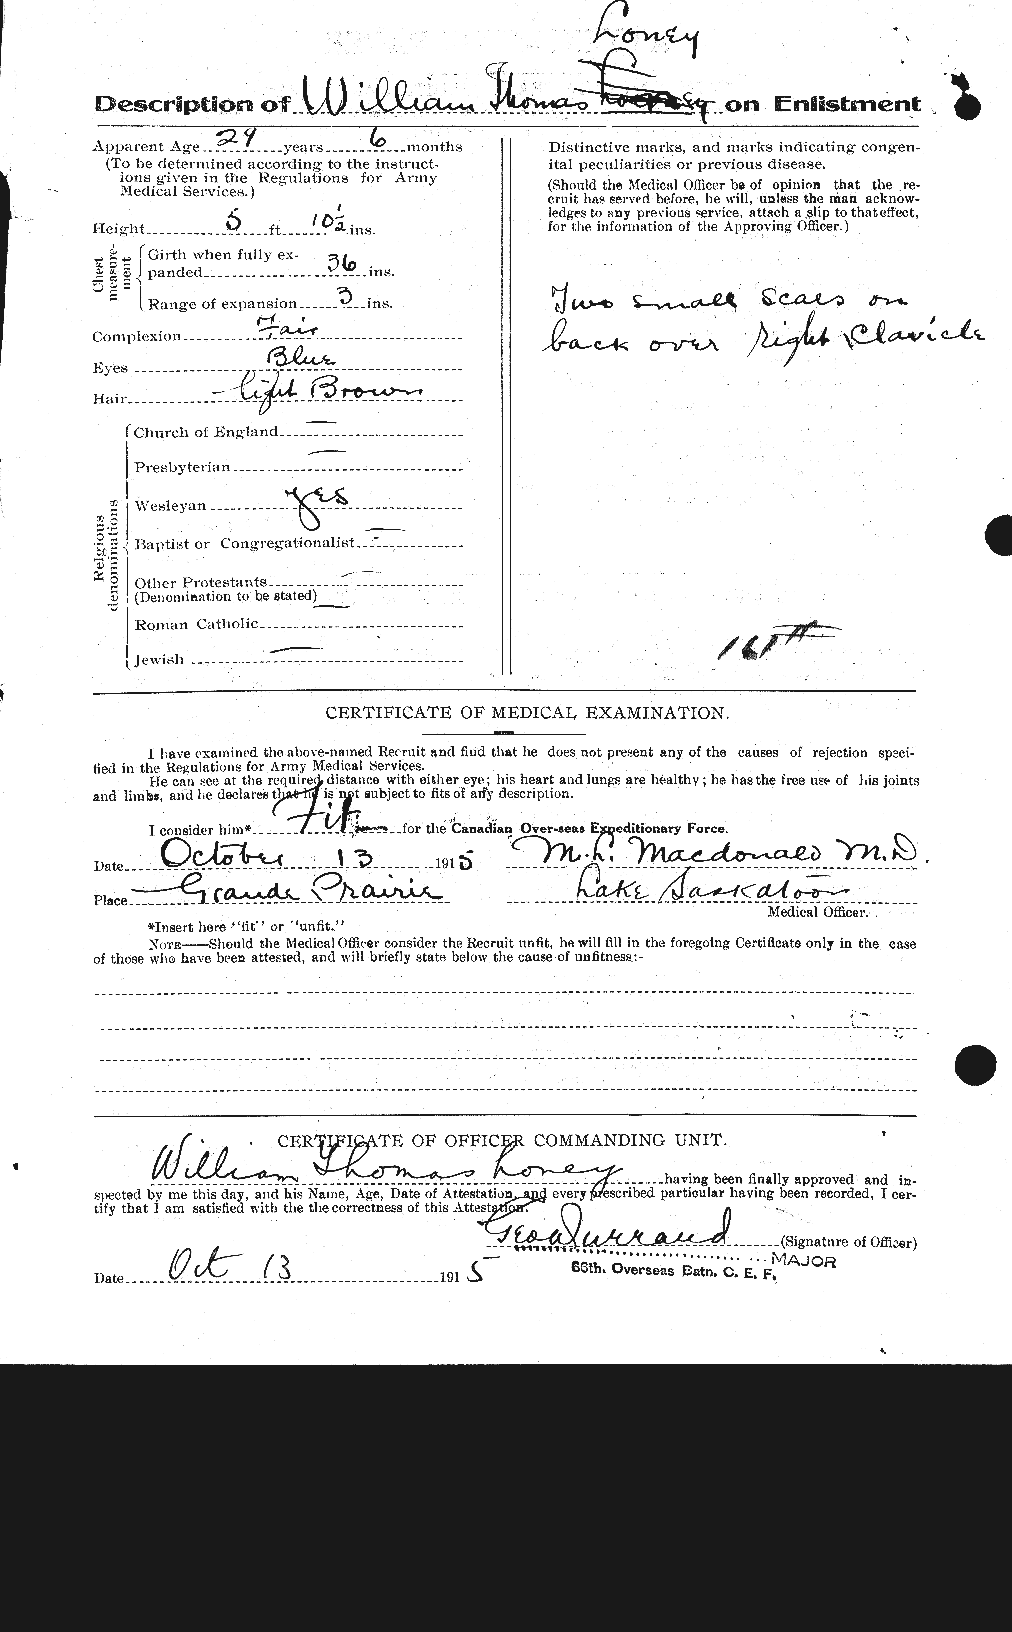 Personnel Records of the First World War - CEF 464572b